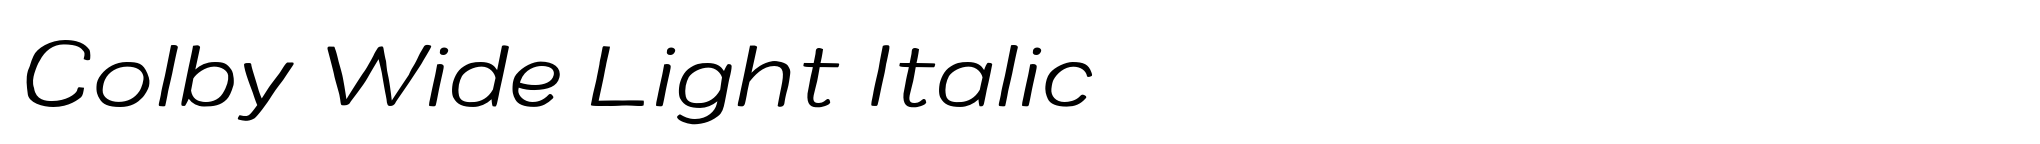 Colby Wide Light Italic image